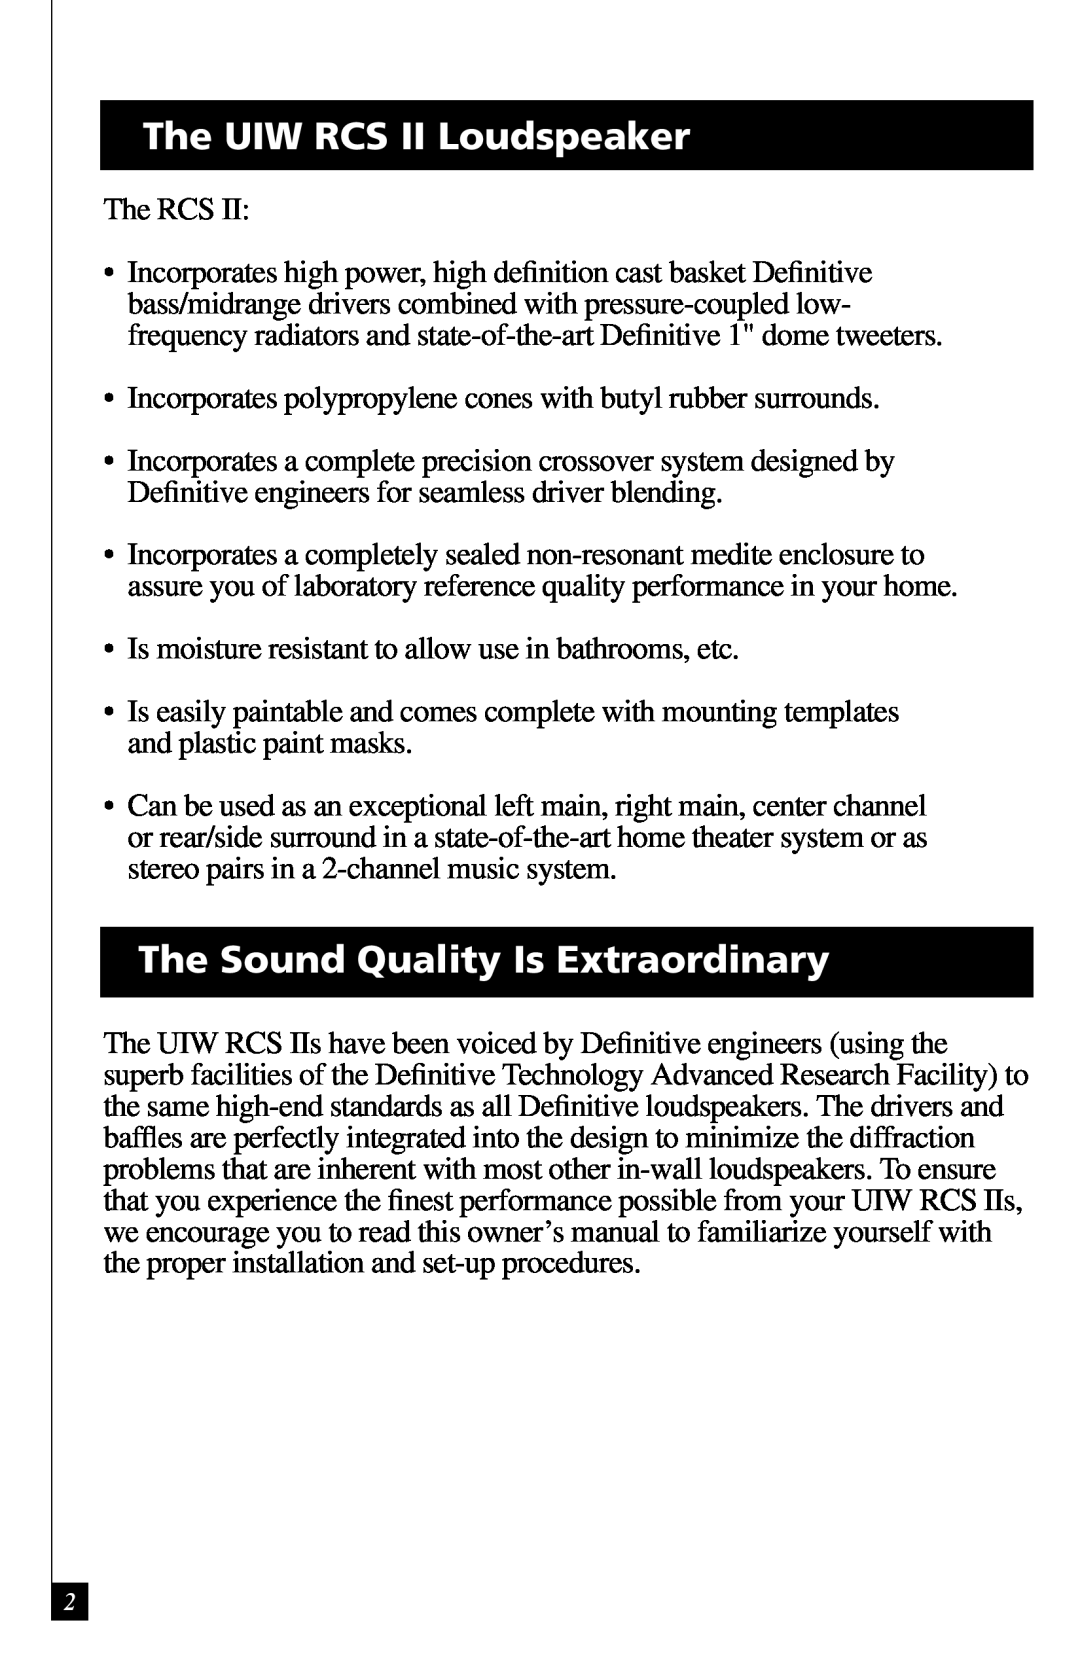 Definitive Technology owner manual The UIW RCS II Loudspeaker, The Sound Quality Is Extraordinary 